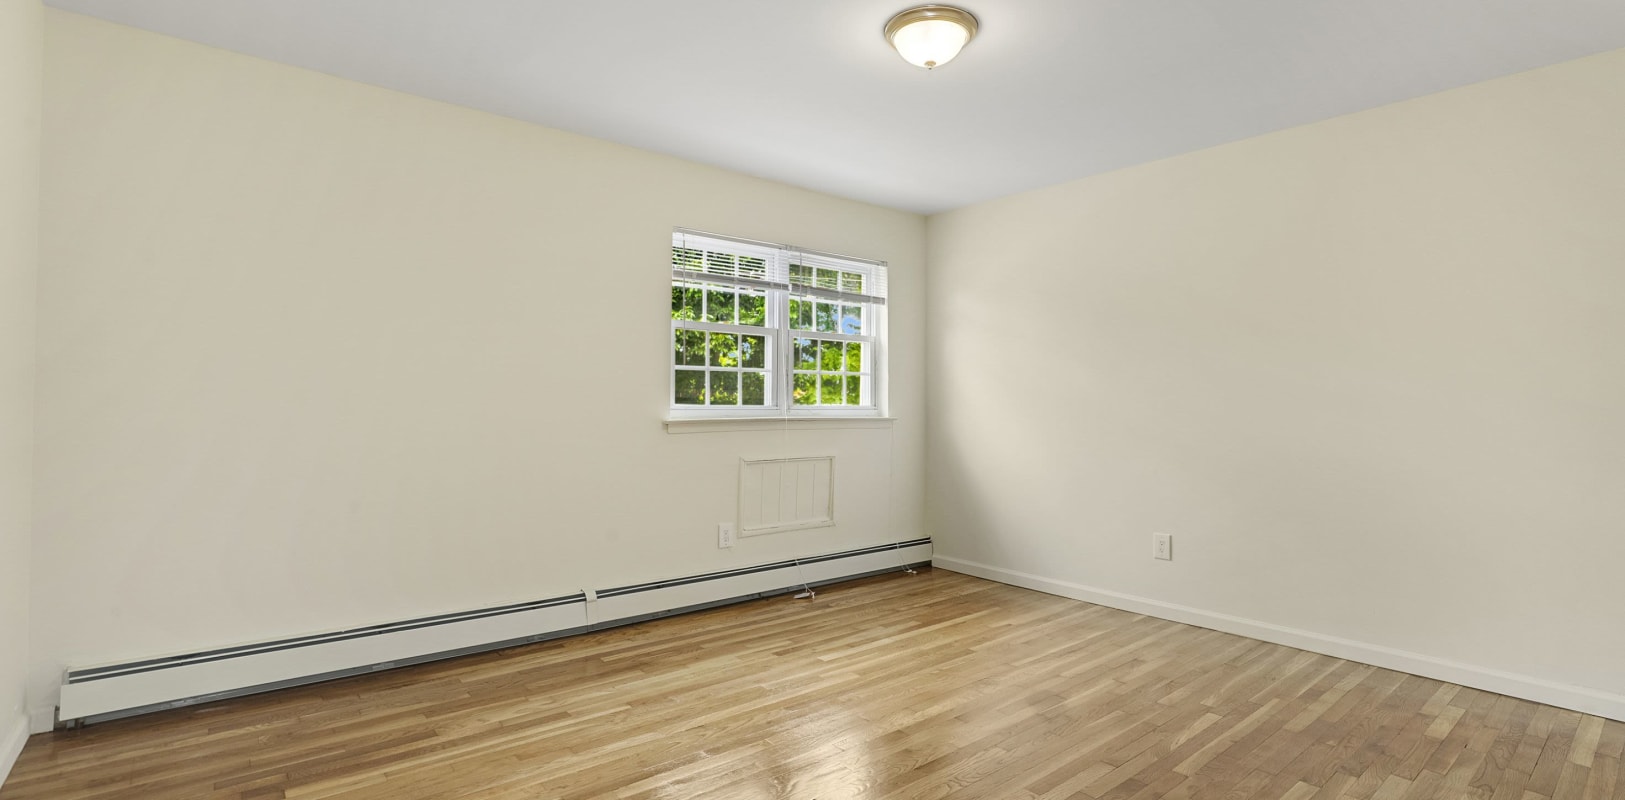 Bedroom with wood style flooring at Balmoral Arms in Matawan, New Jersey